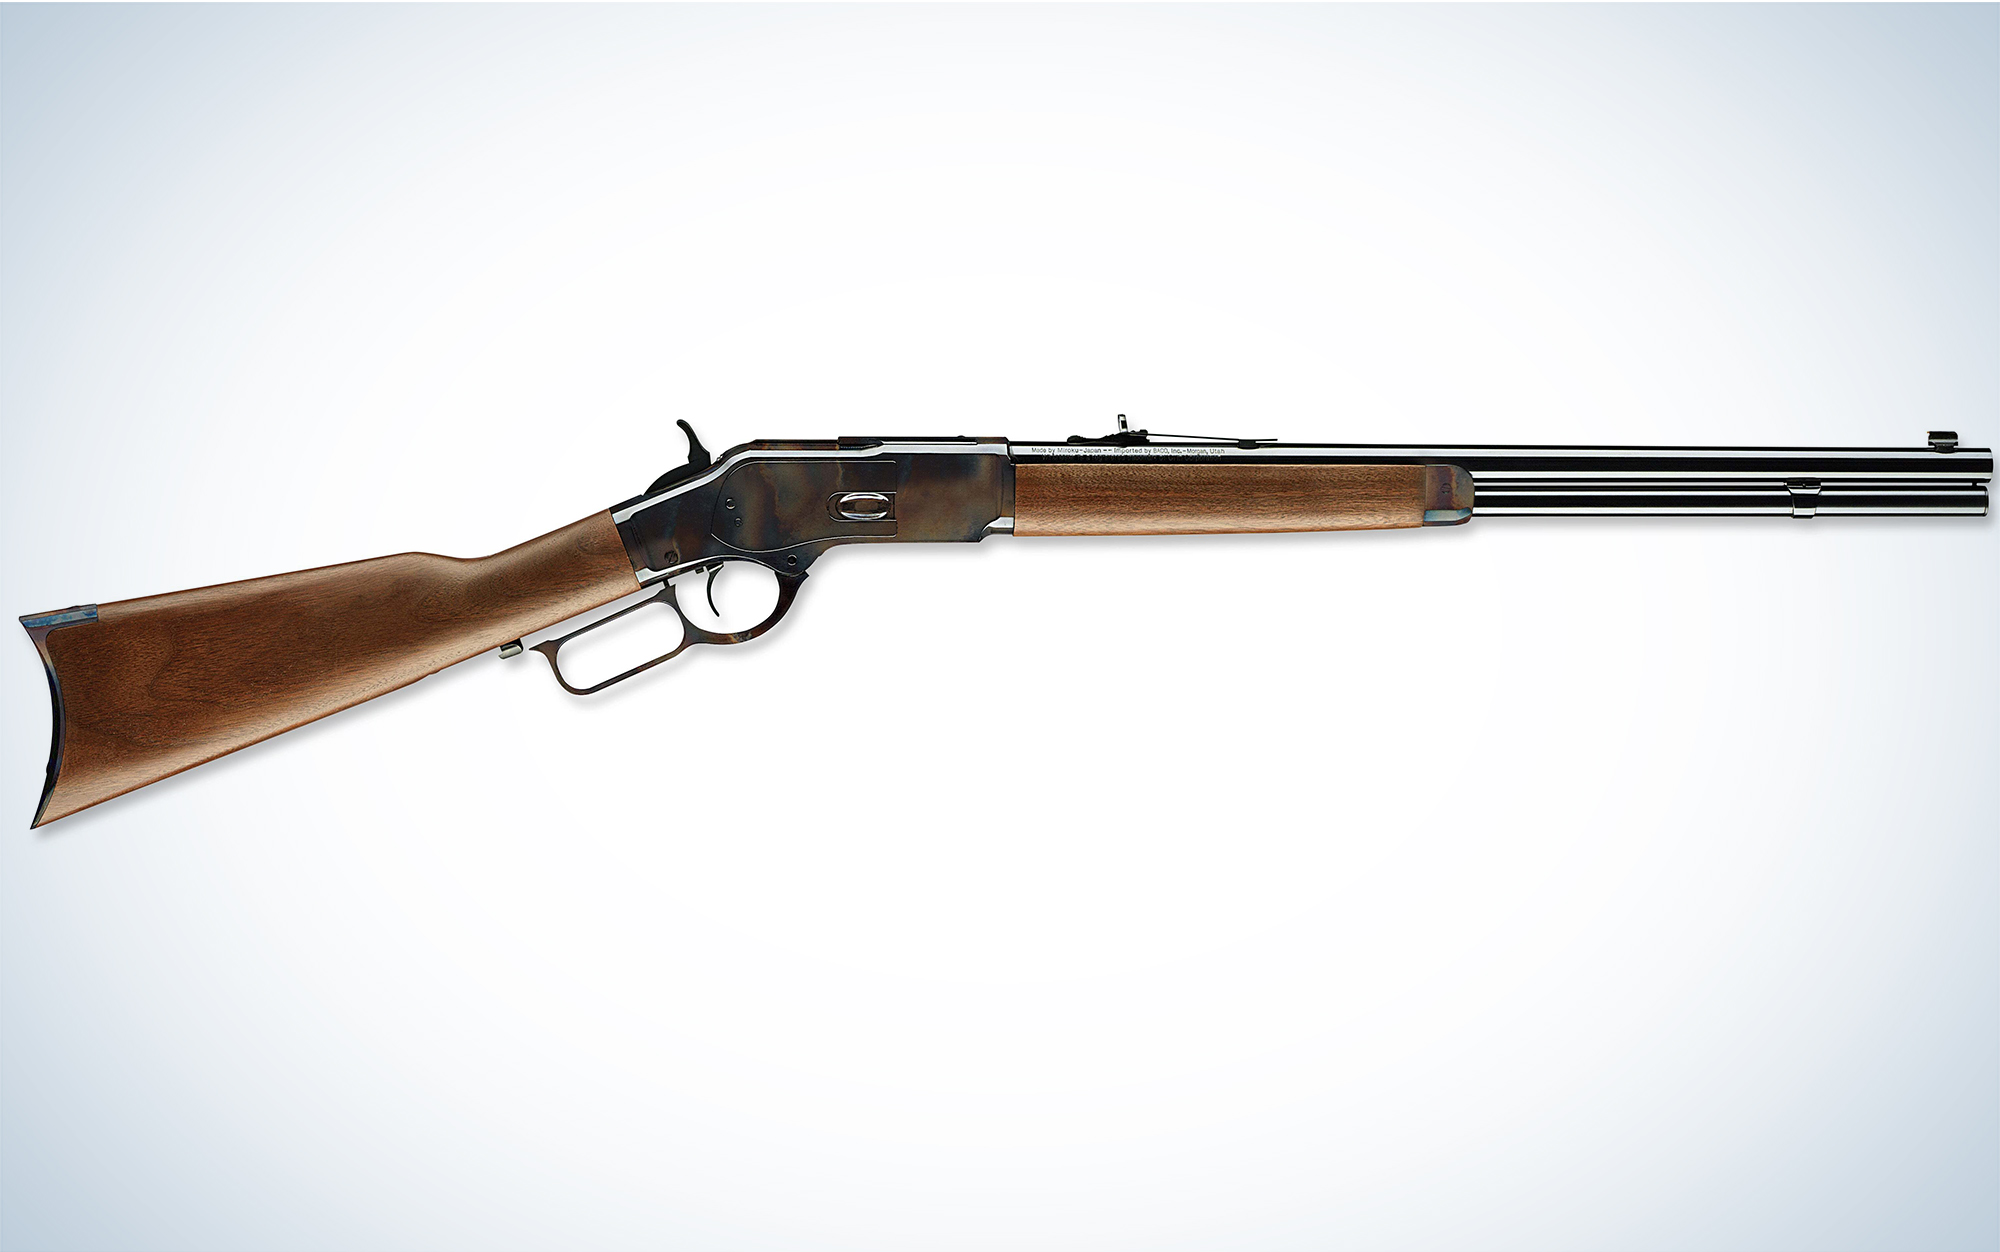 The Winchester 1873 is one of the best lever action rifles.